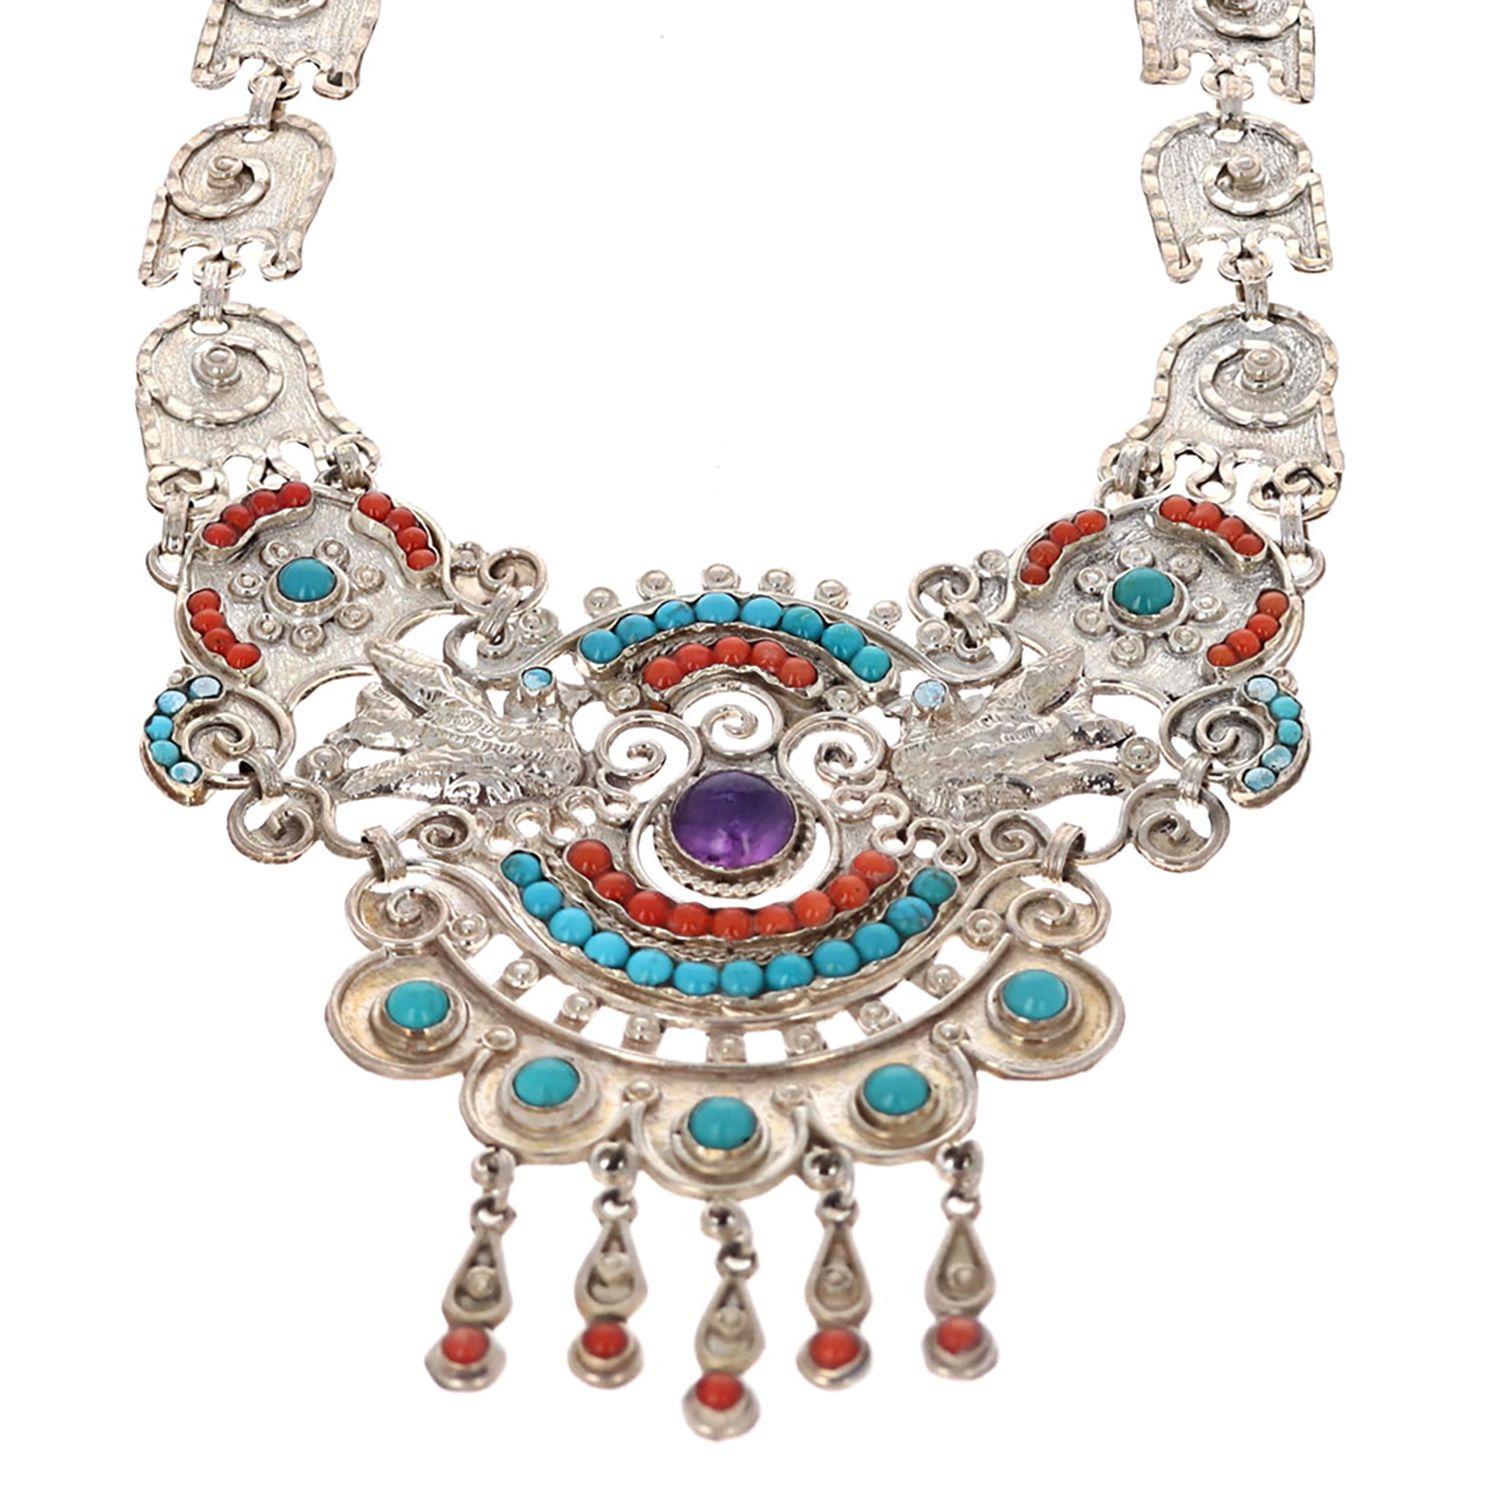 Turquoise and Coral Link Necklace - Malouf on the Plaza